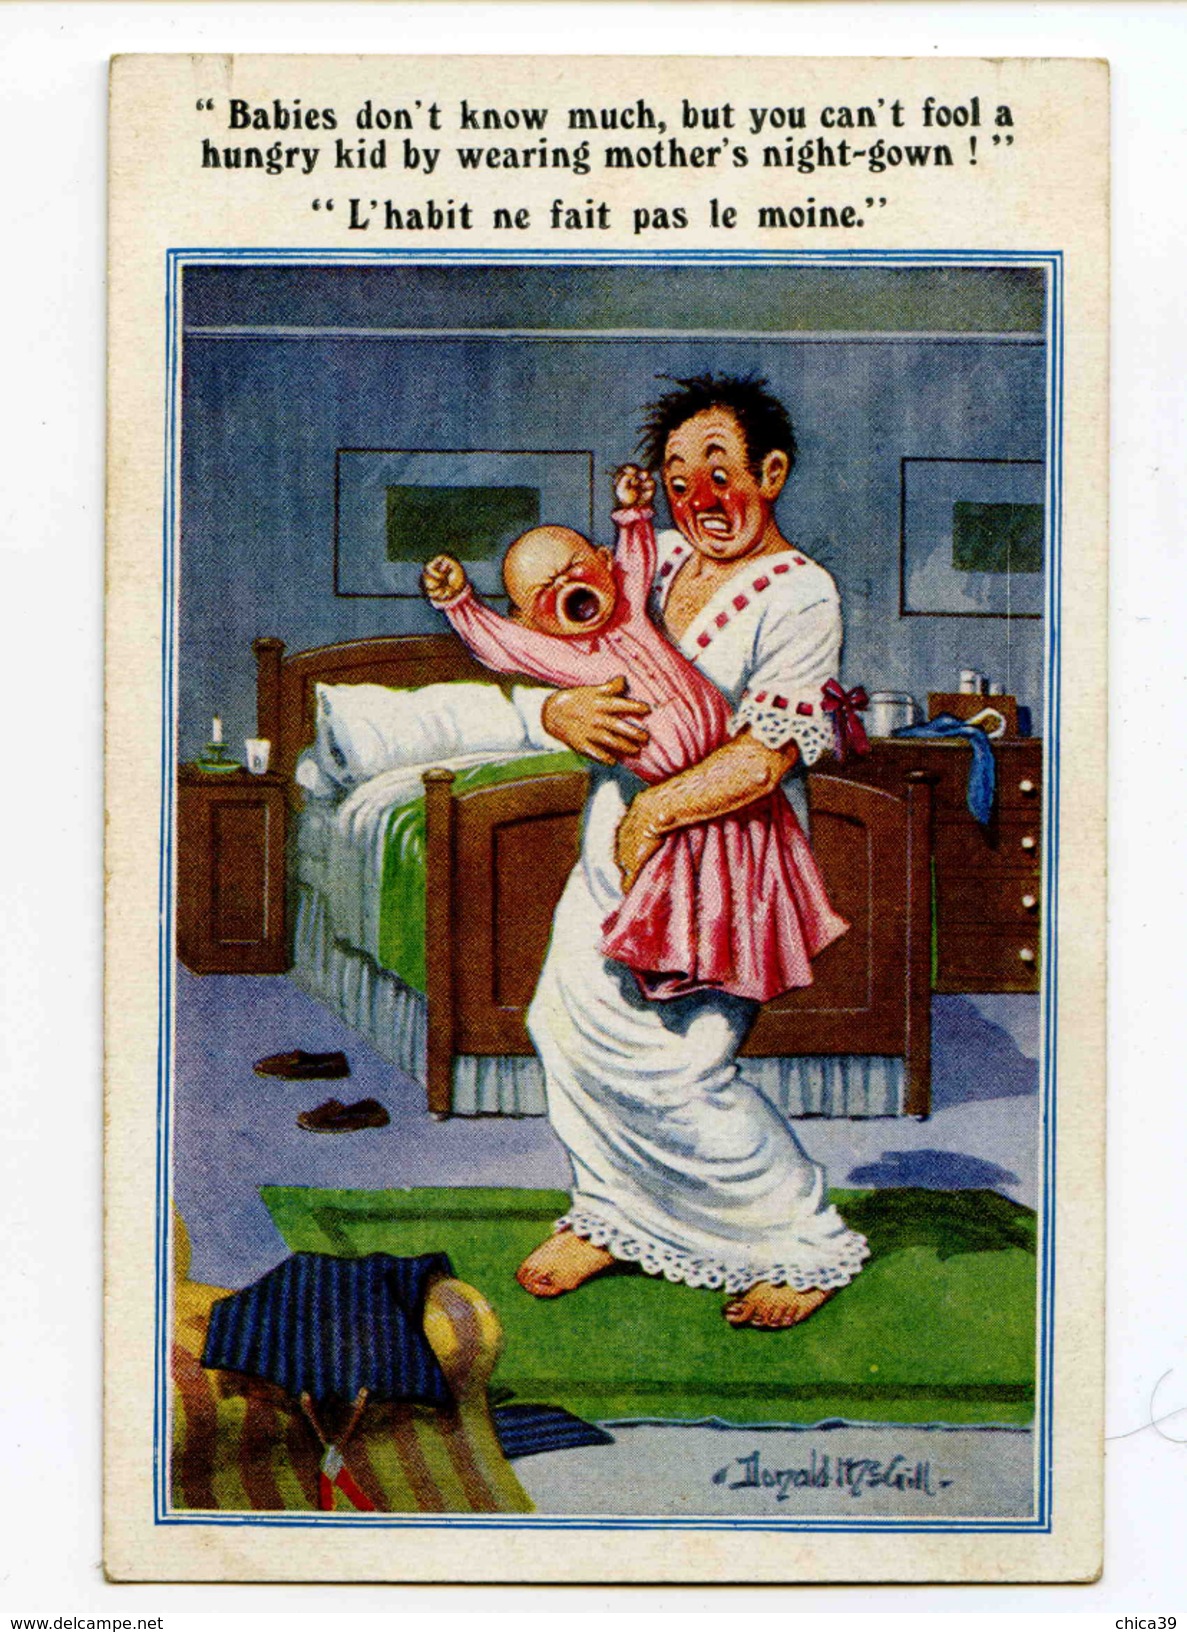 C 18961 - D. Mc Gill - L'habit Ne Fait Pas Le Moine - Babies Don't Know Much, But You Can't Fool A Hungry Kid By W...... - Mc Gill, Donald